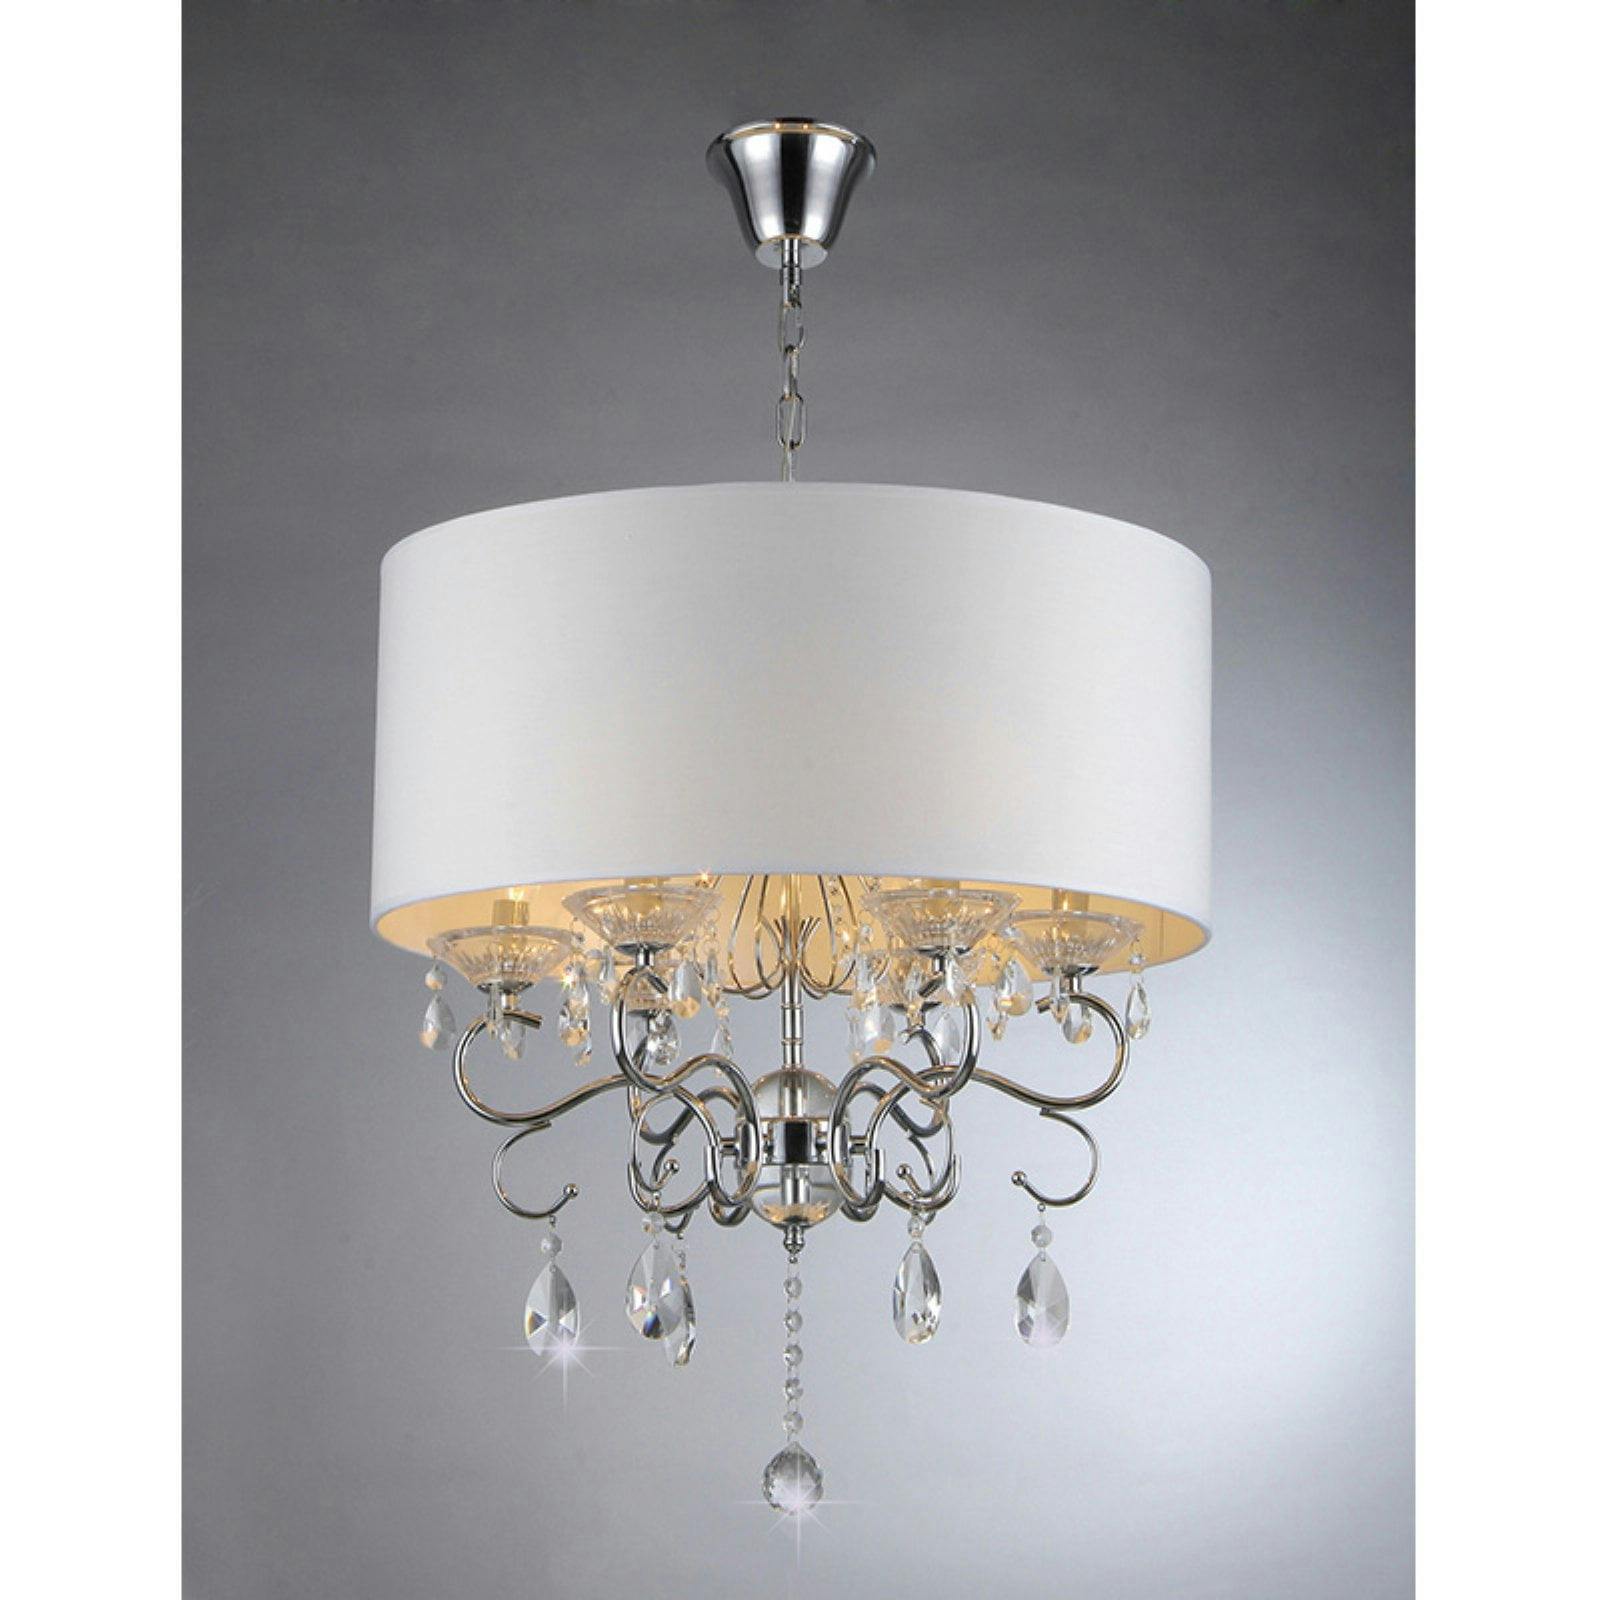 Elegant Chrome Drum Chandelier with Ivory Faux Silk Shade and Crystal Accents